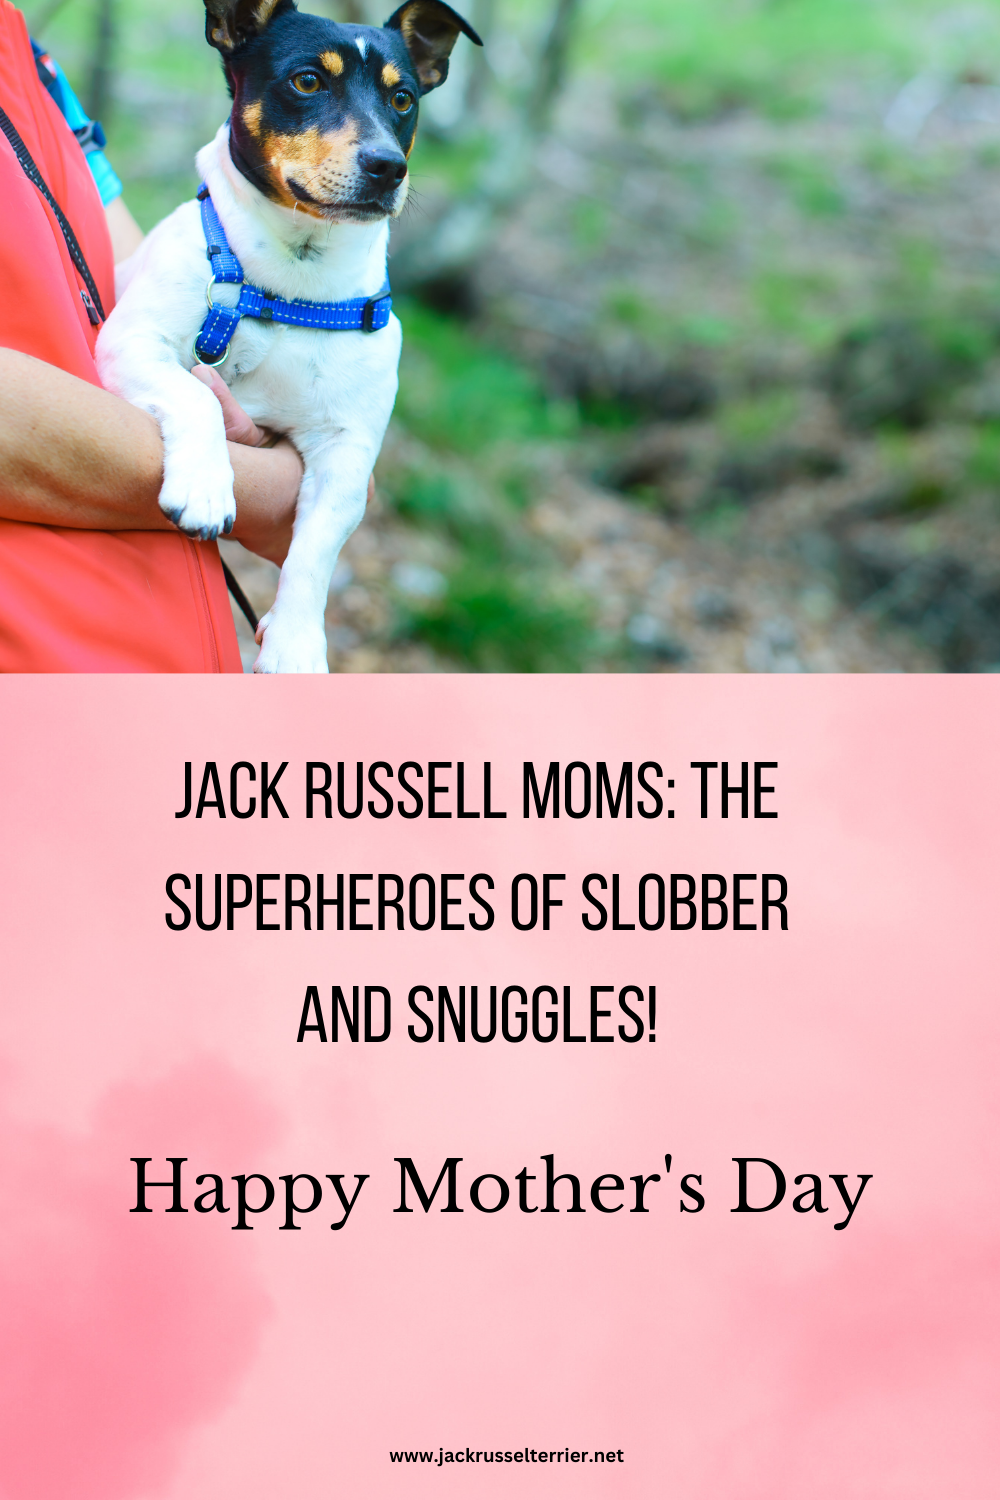 quotes about mom dog jackrussell moms